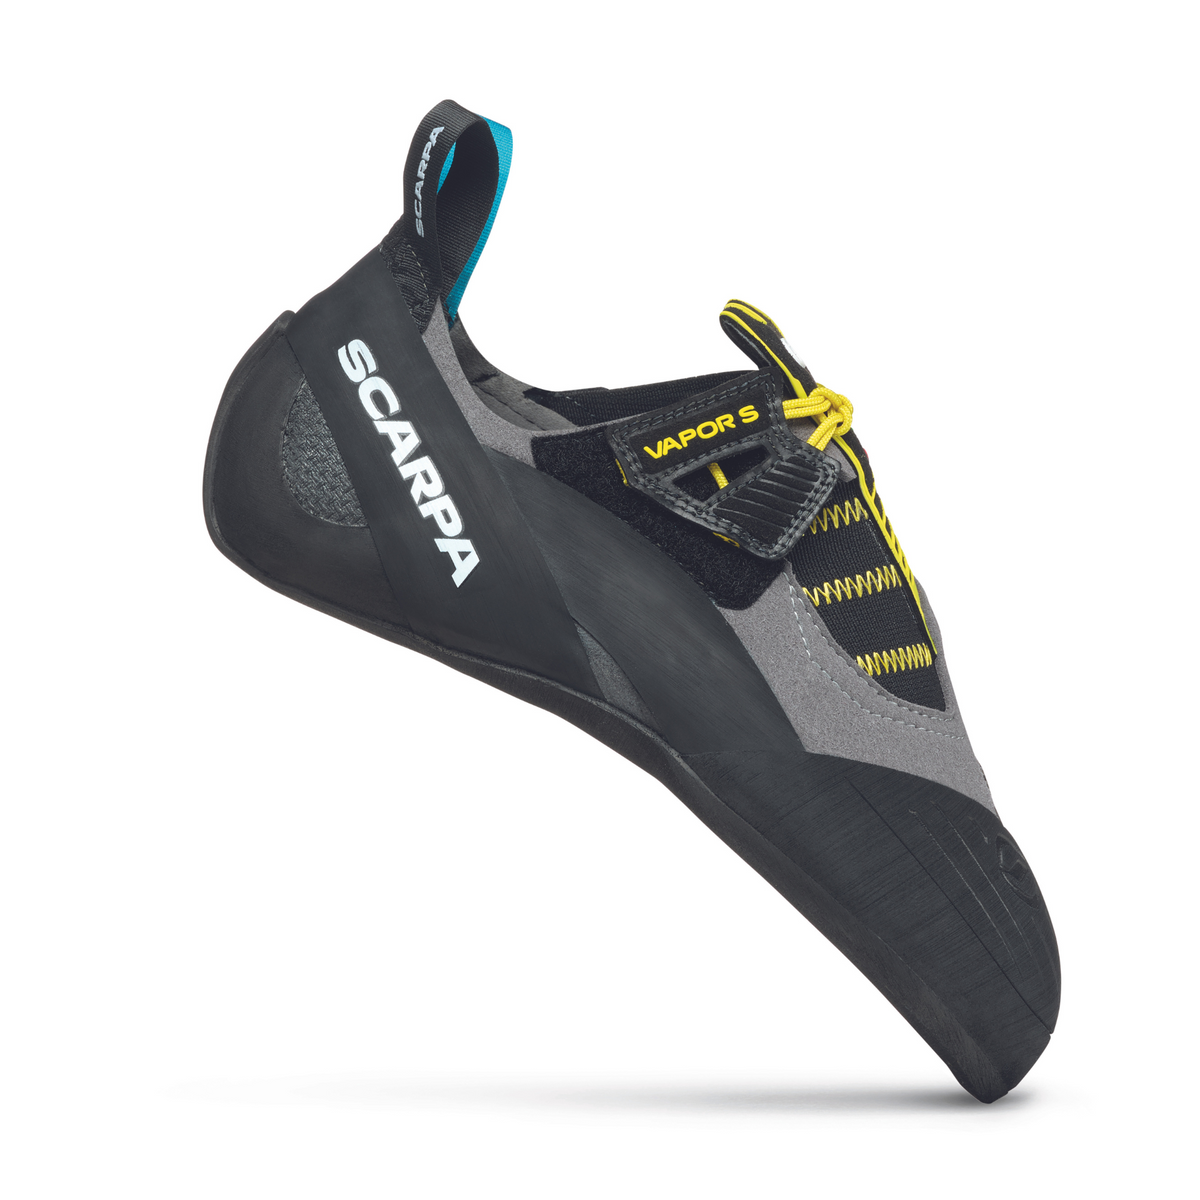 Scarpa Vapour S in smoke-grey with yellow trim. image showing outside sole with removable strap